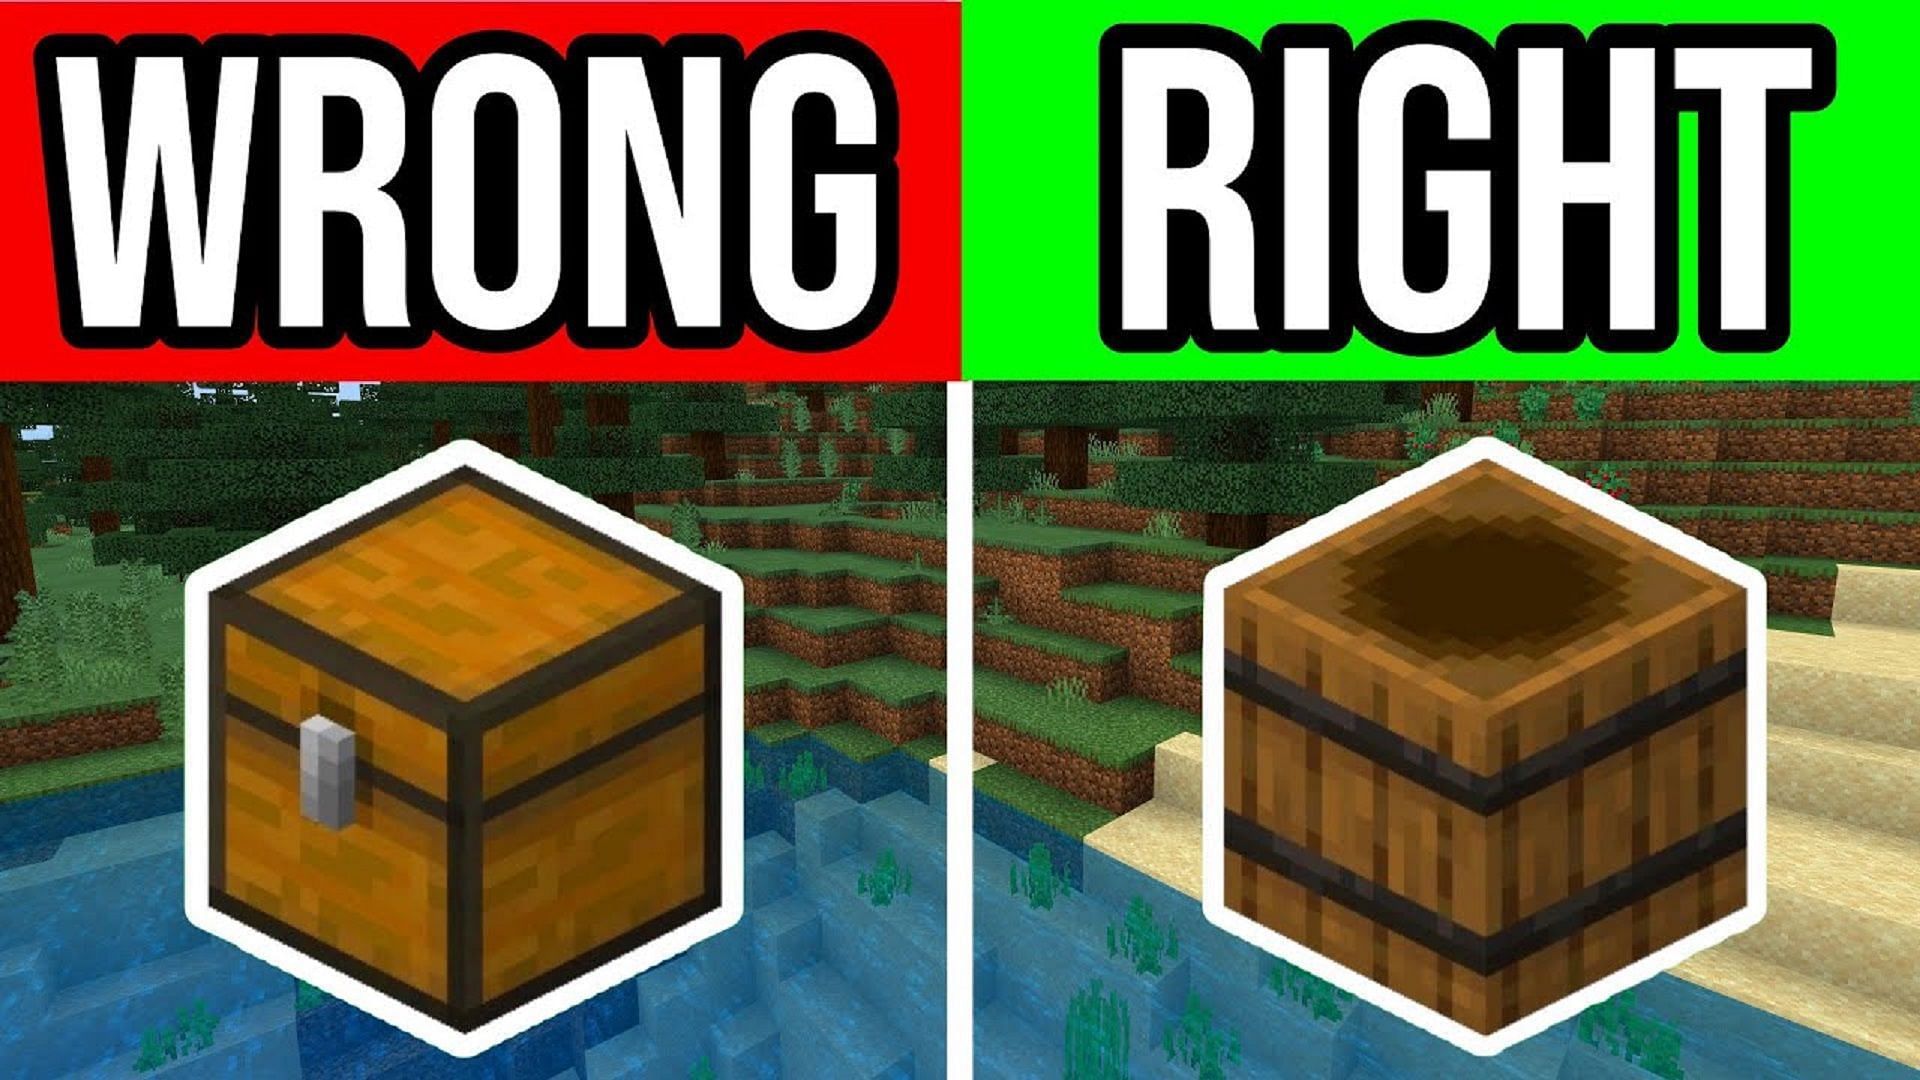 In many cases, buckets are better than boxes (Image via VIPmanYT/Youtube)